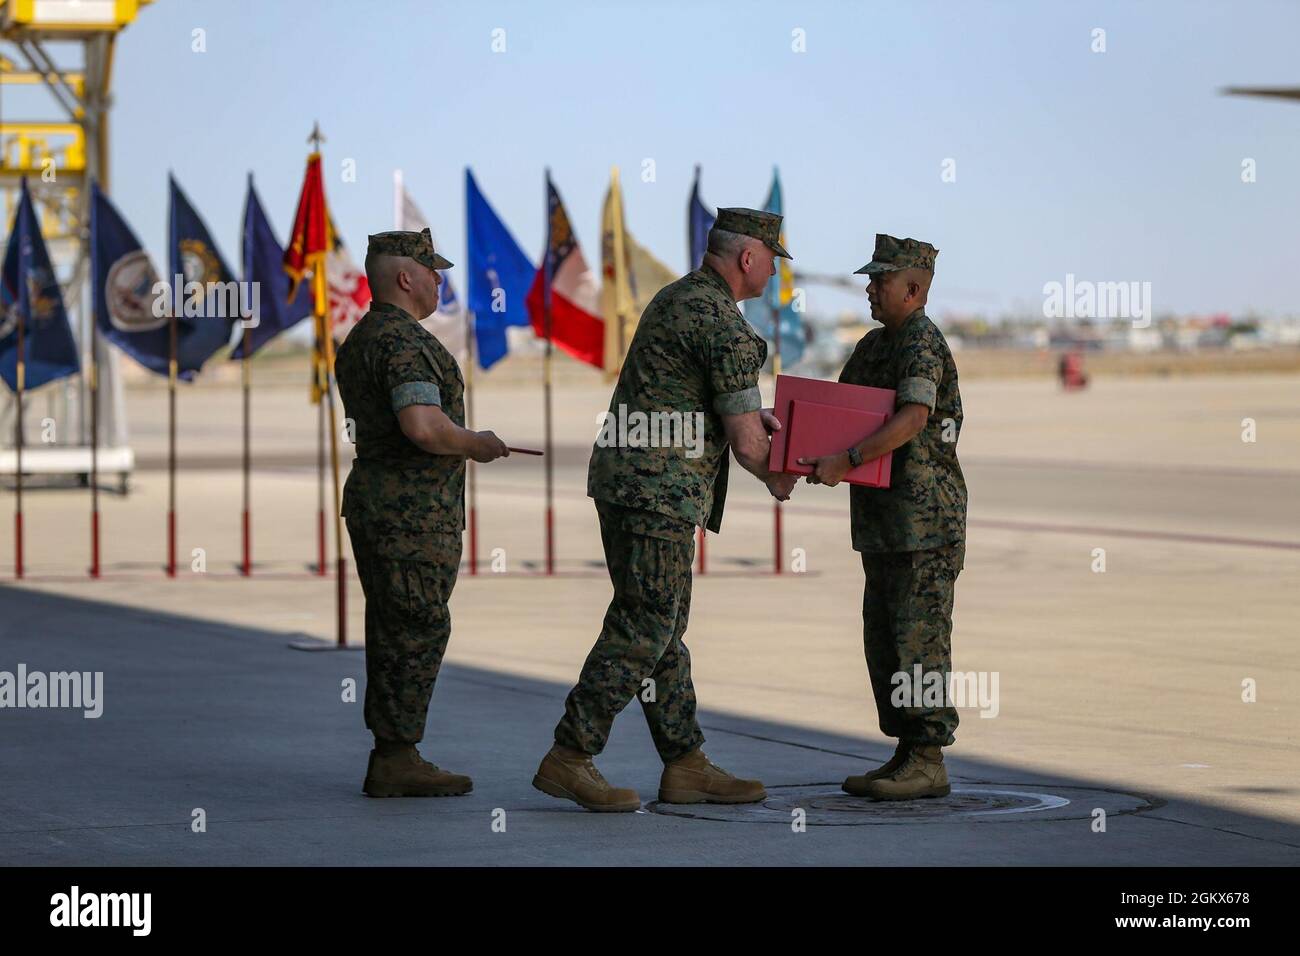 U.S. Marine Corps Sgt. Maj. Larry Buenafe receives awards from Col. Bryon Sullivan during a change of command ceremony on Marine Corps Air Station Yuma, Ariz., June 15, 2021. Sgt. Maj. Buenafe was relieved of his duty as Marine Operational Test and Evaluation Squadron 1 sergeant major by Sgt. Maj. Frank Gratacos. Stock Photo